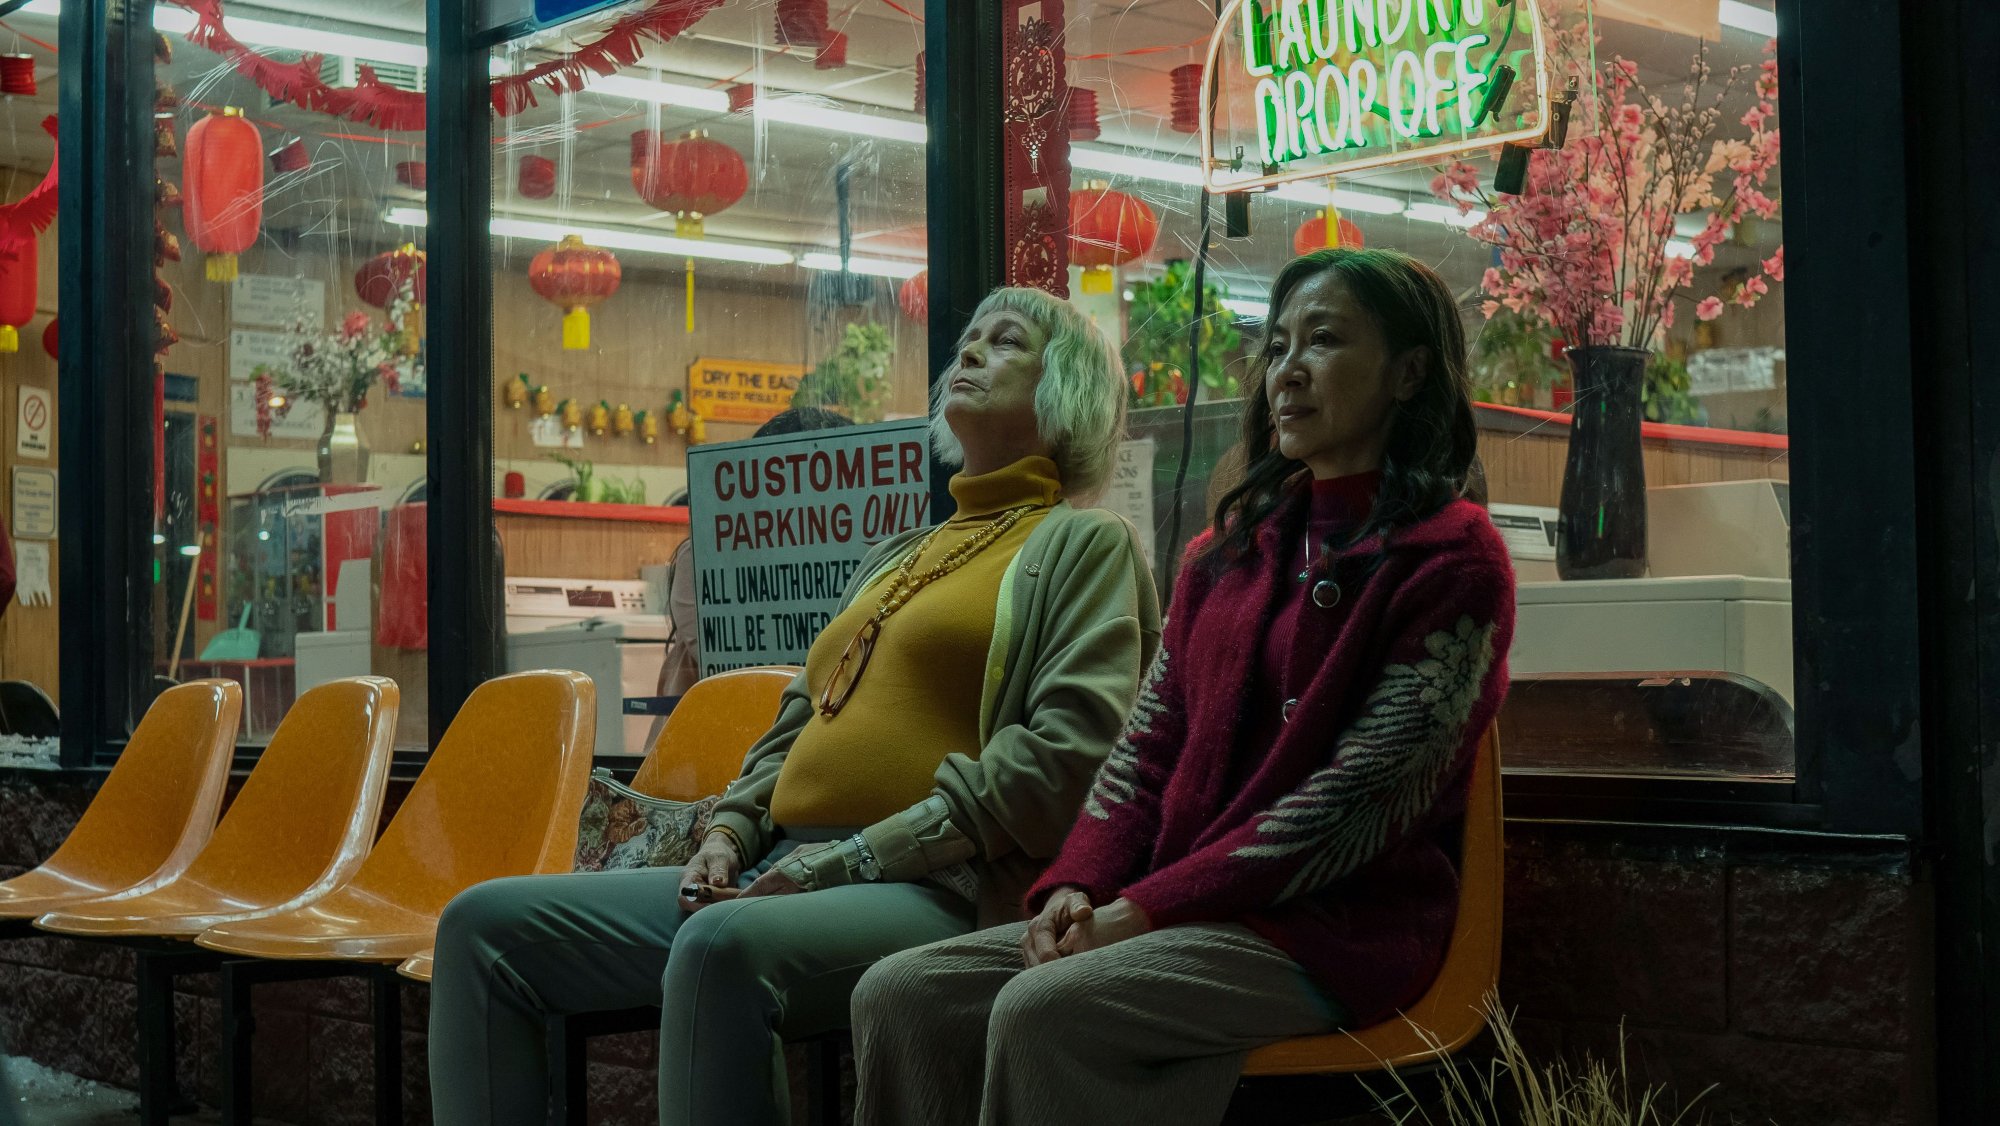 'Everything, Everywhere All at Once' Jamie Lee Curtis as Deirdre Beaubeirdra and Michelle Yeoh as Evelyn Wang sitting next to each other in front of the laundromat